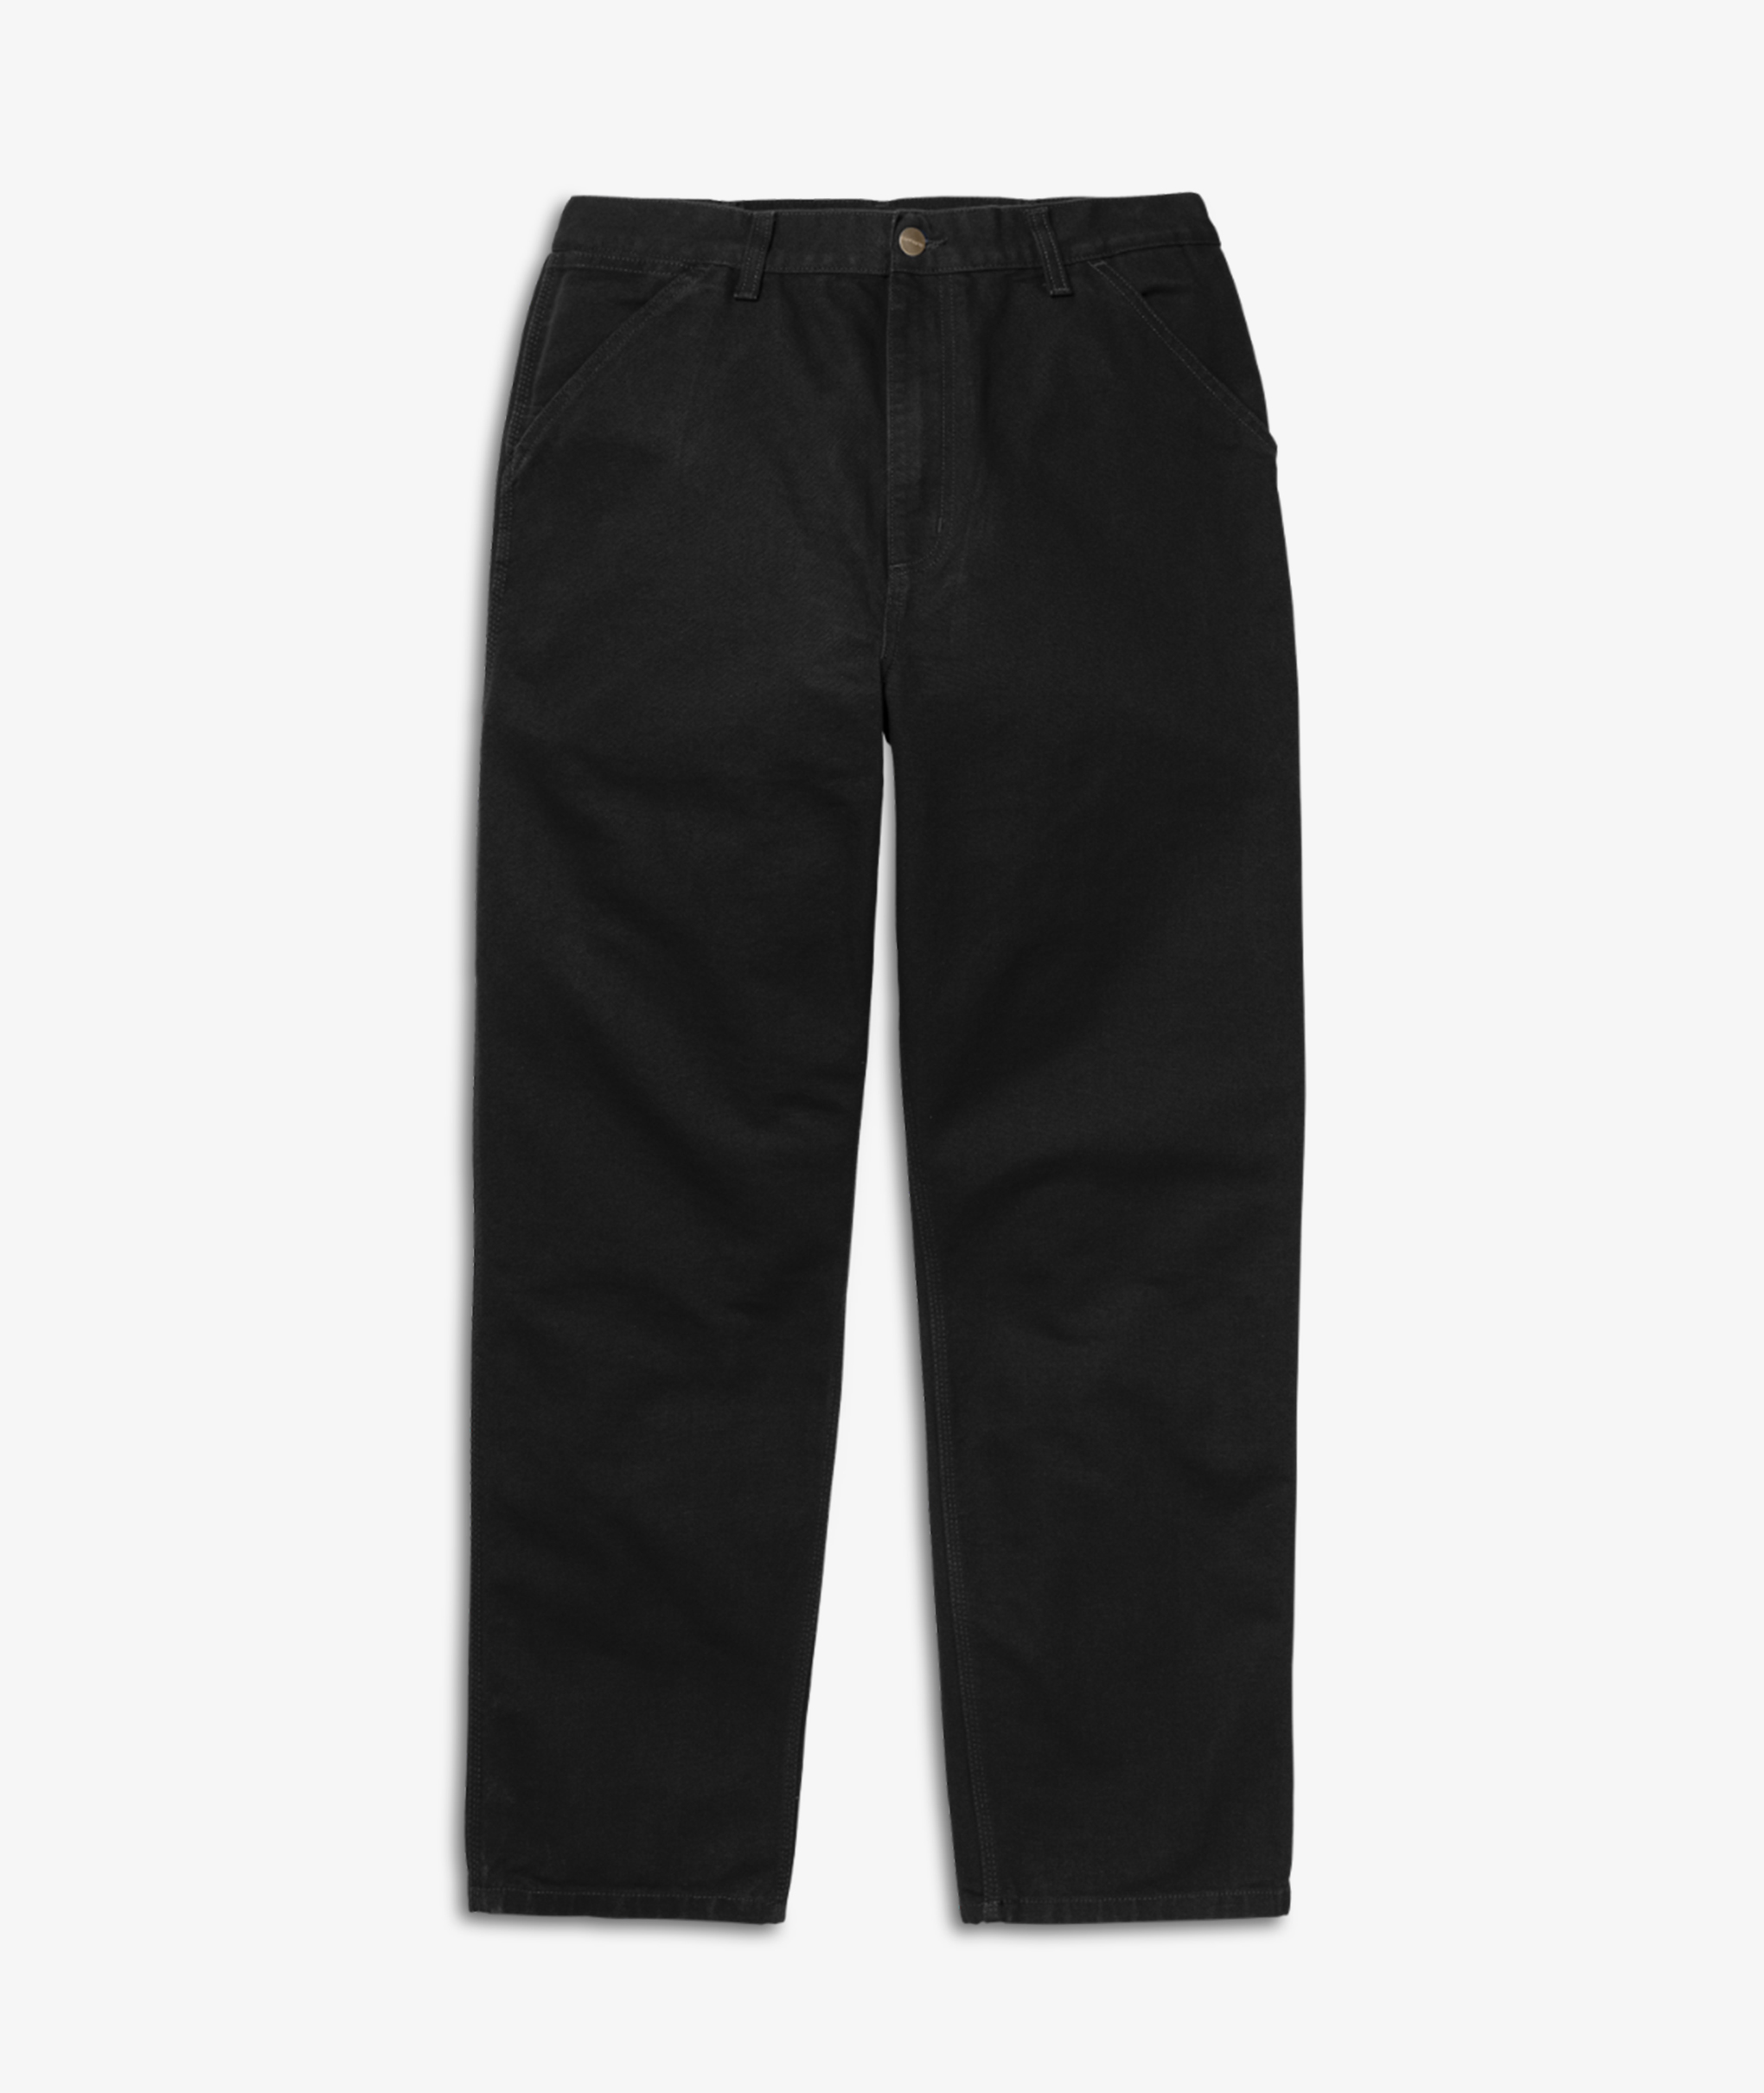 Norse Store | Shipping Worldwide - Carhartt WIP Single Knee Pant ...